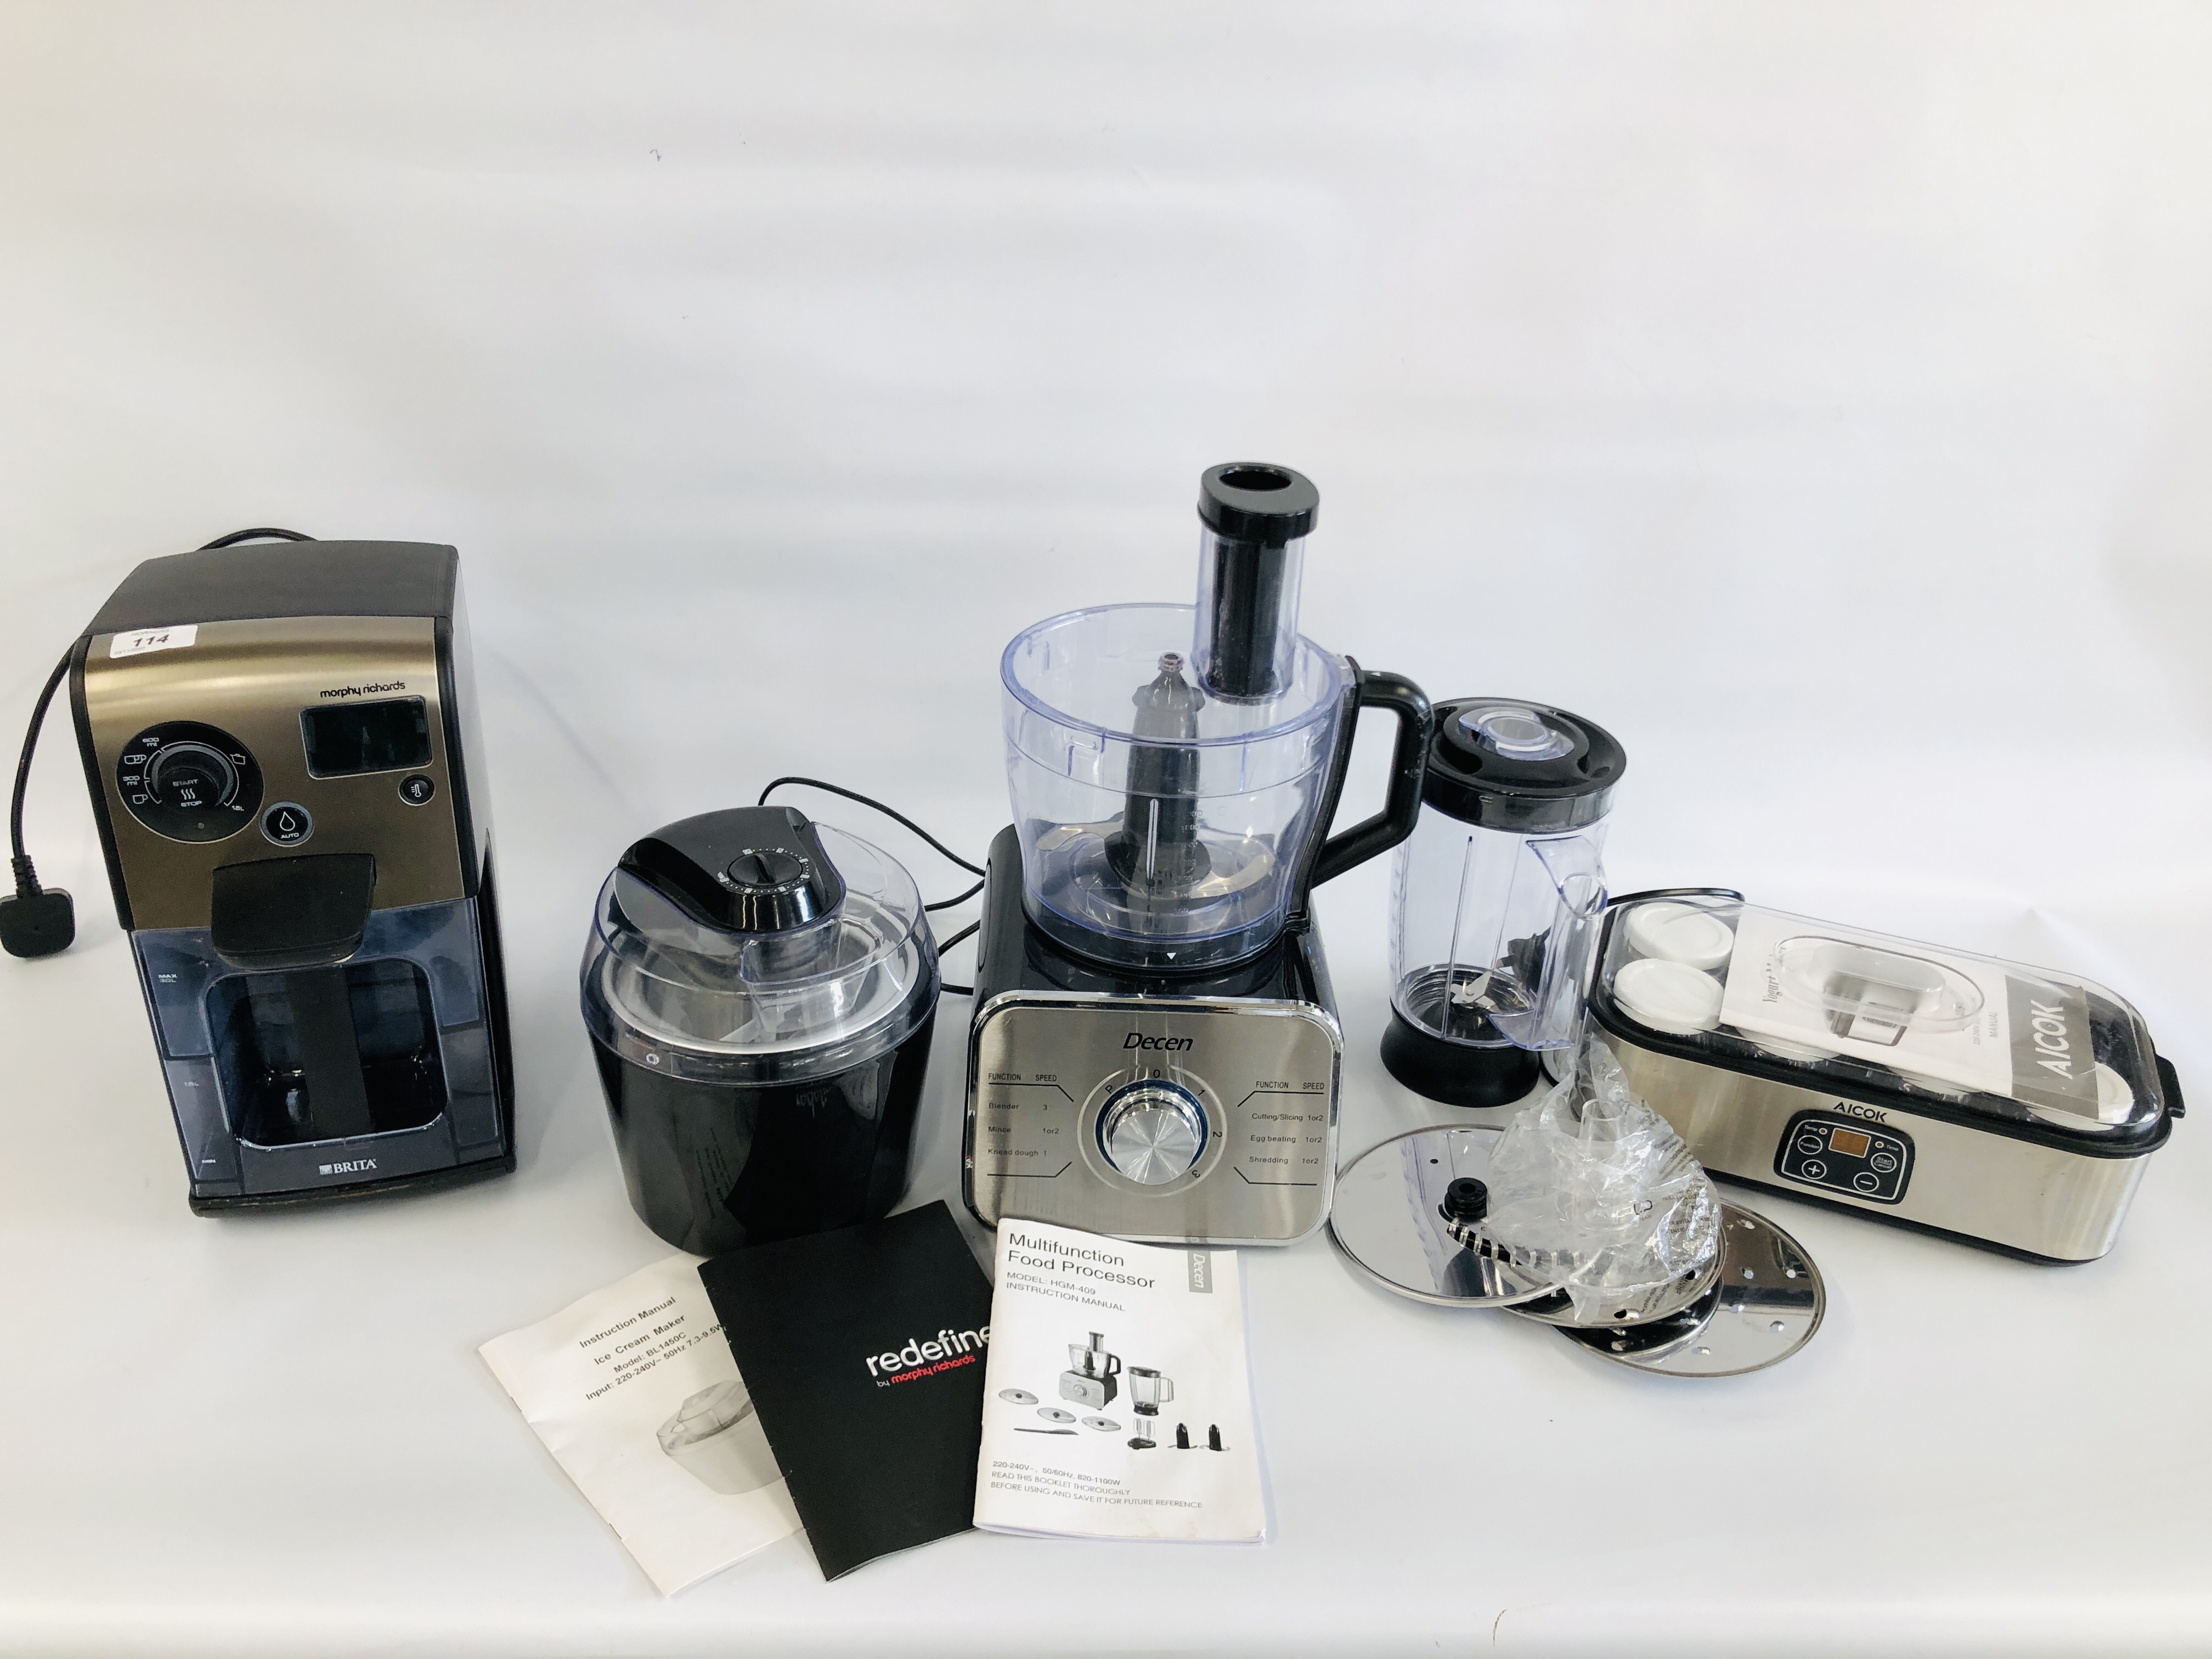 A MORPHY RICHARDS HOT WATER URN ALONG WITH DECEN MULTIFUNCTION FOOD PROCESSOR,